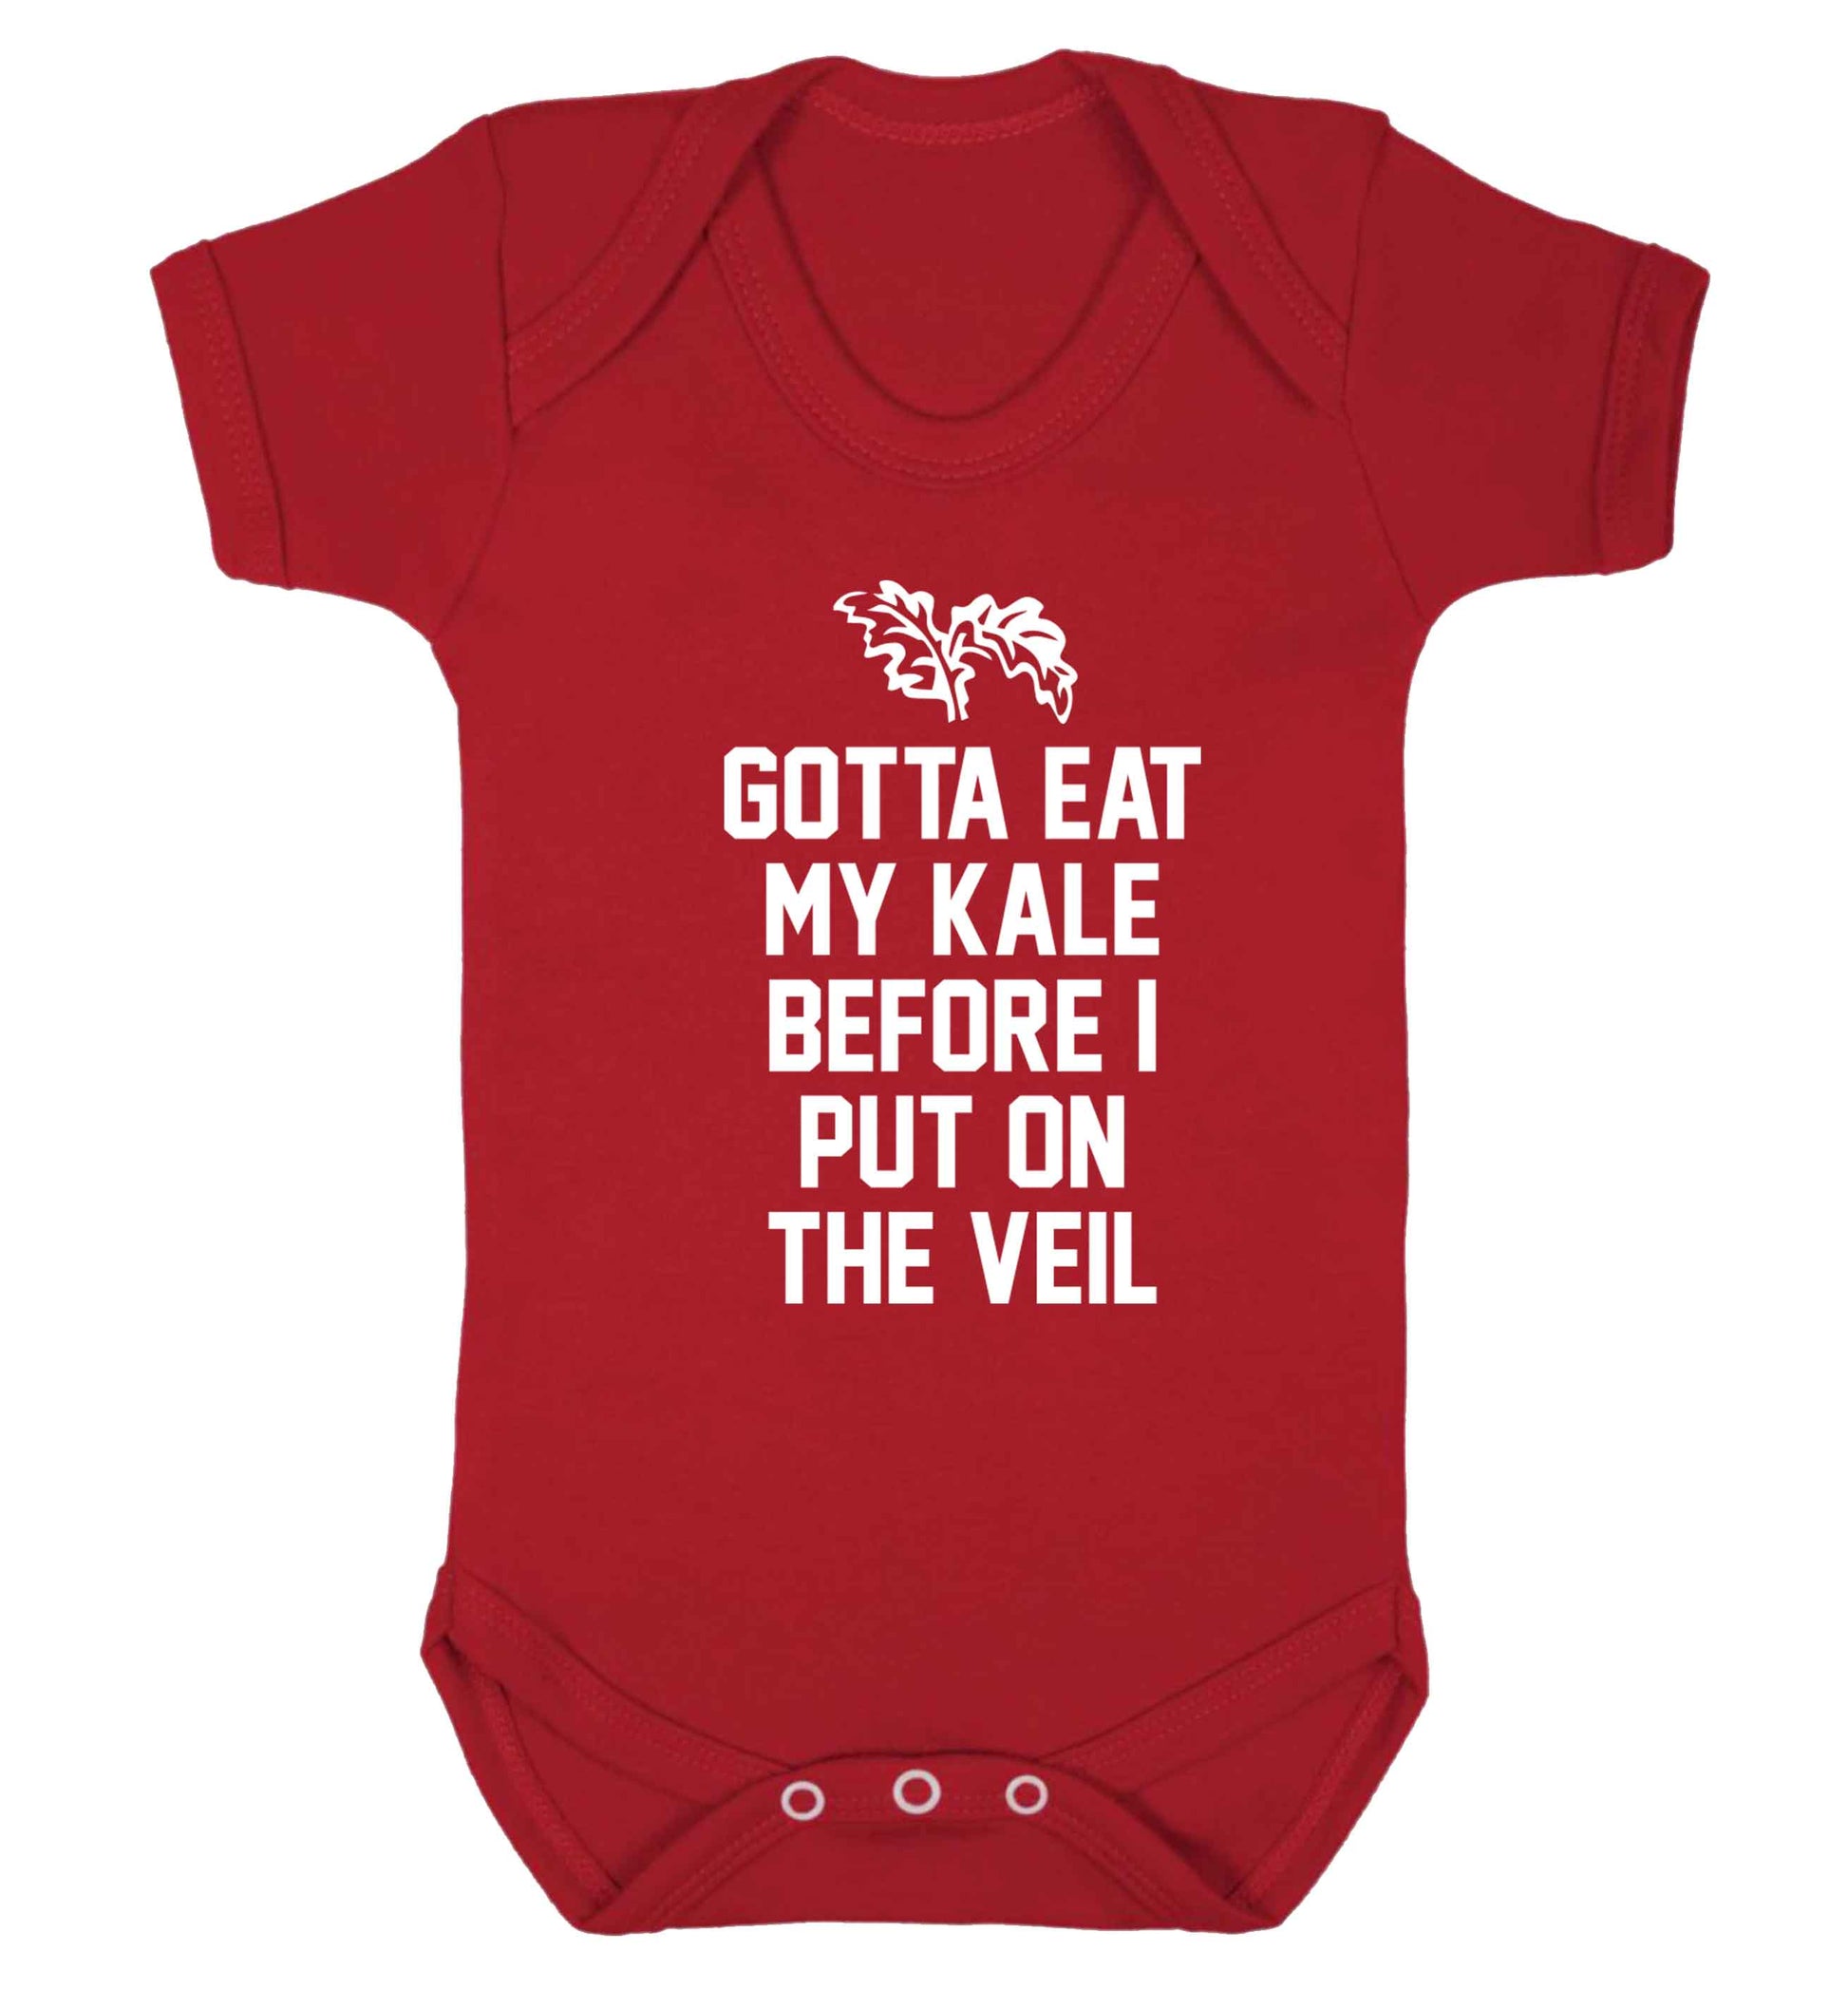 Gotta eat my kale before I put on the veil Baby Vest red 18-24 months